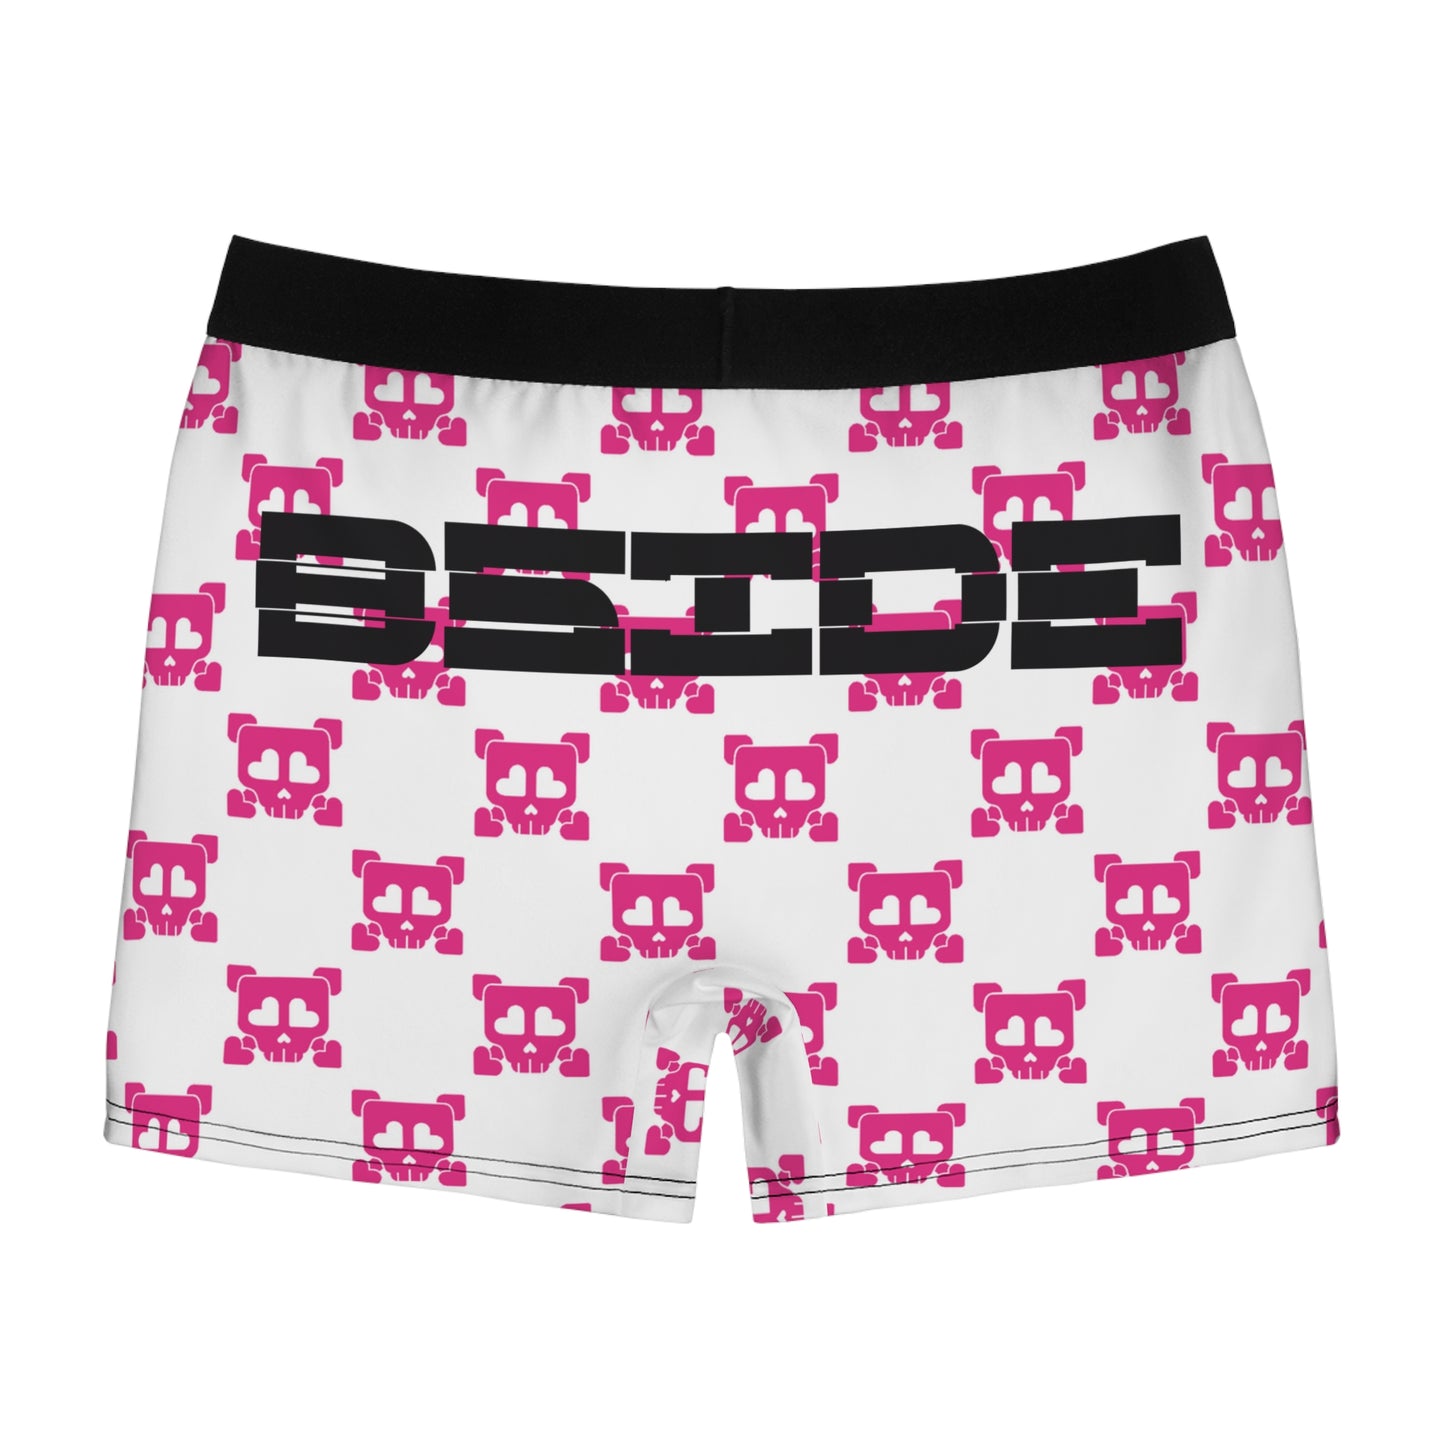 B-Side Boxer Briefs - White and Pink v1